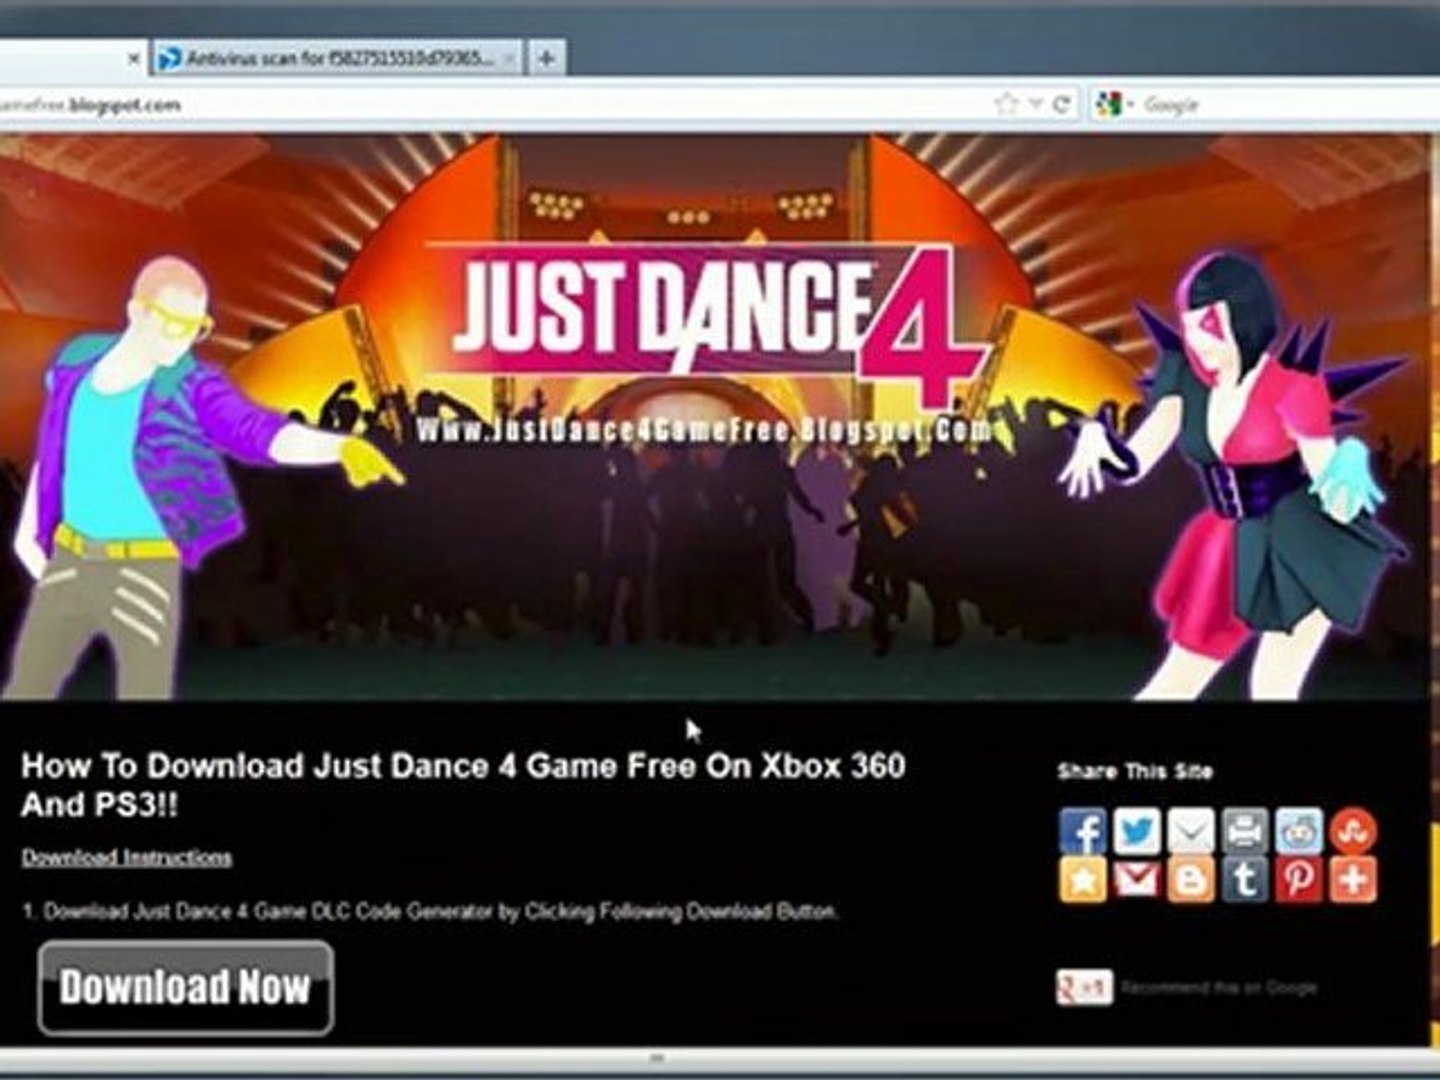 How to Get Just Dance 4 Game Crack Free on Xbox 360 And PS3!! - video  Dailymotion